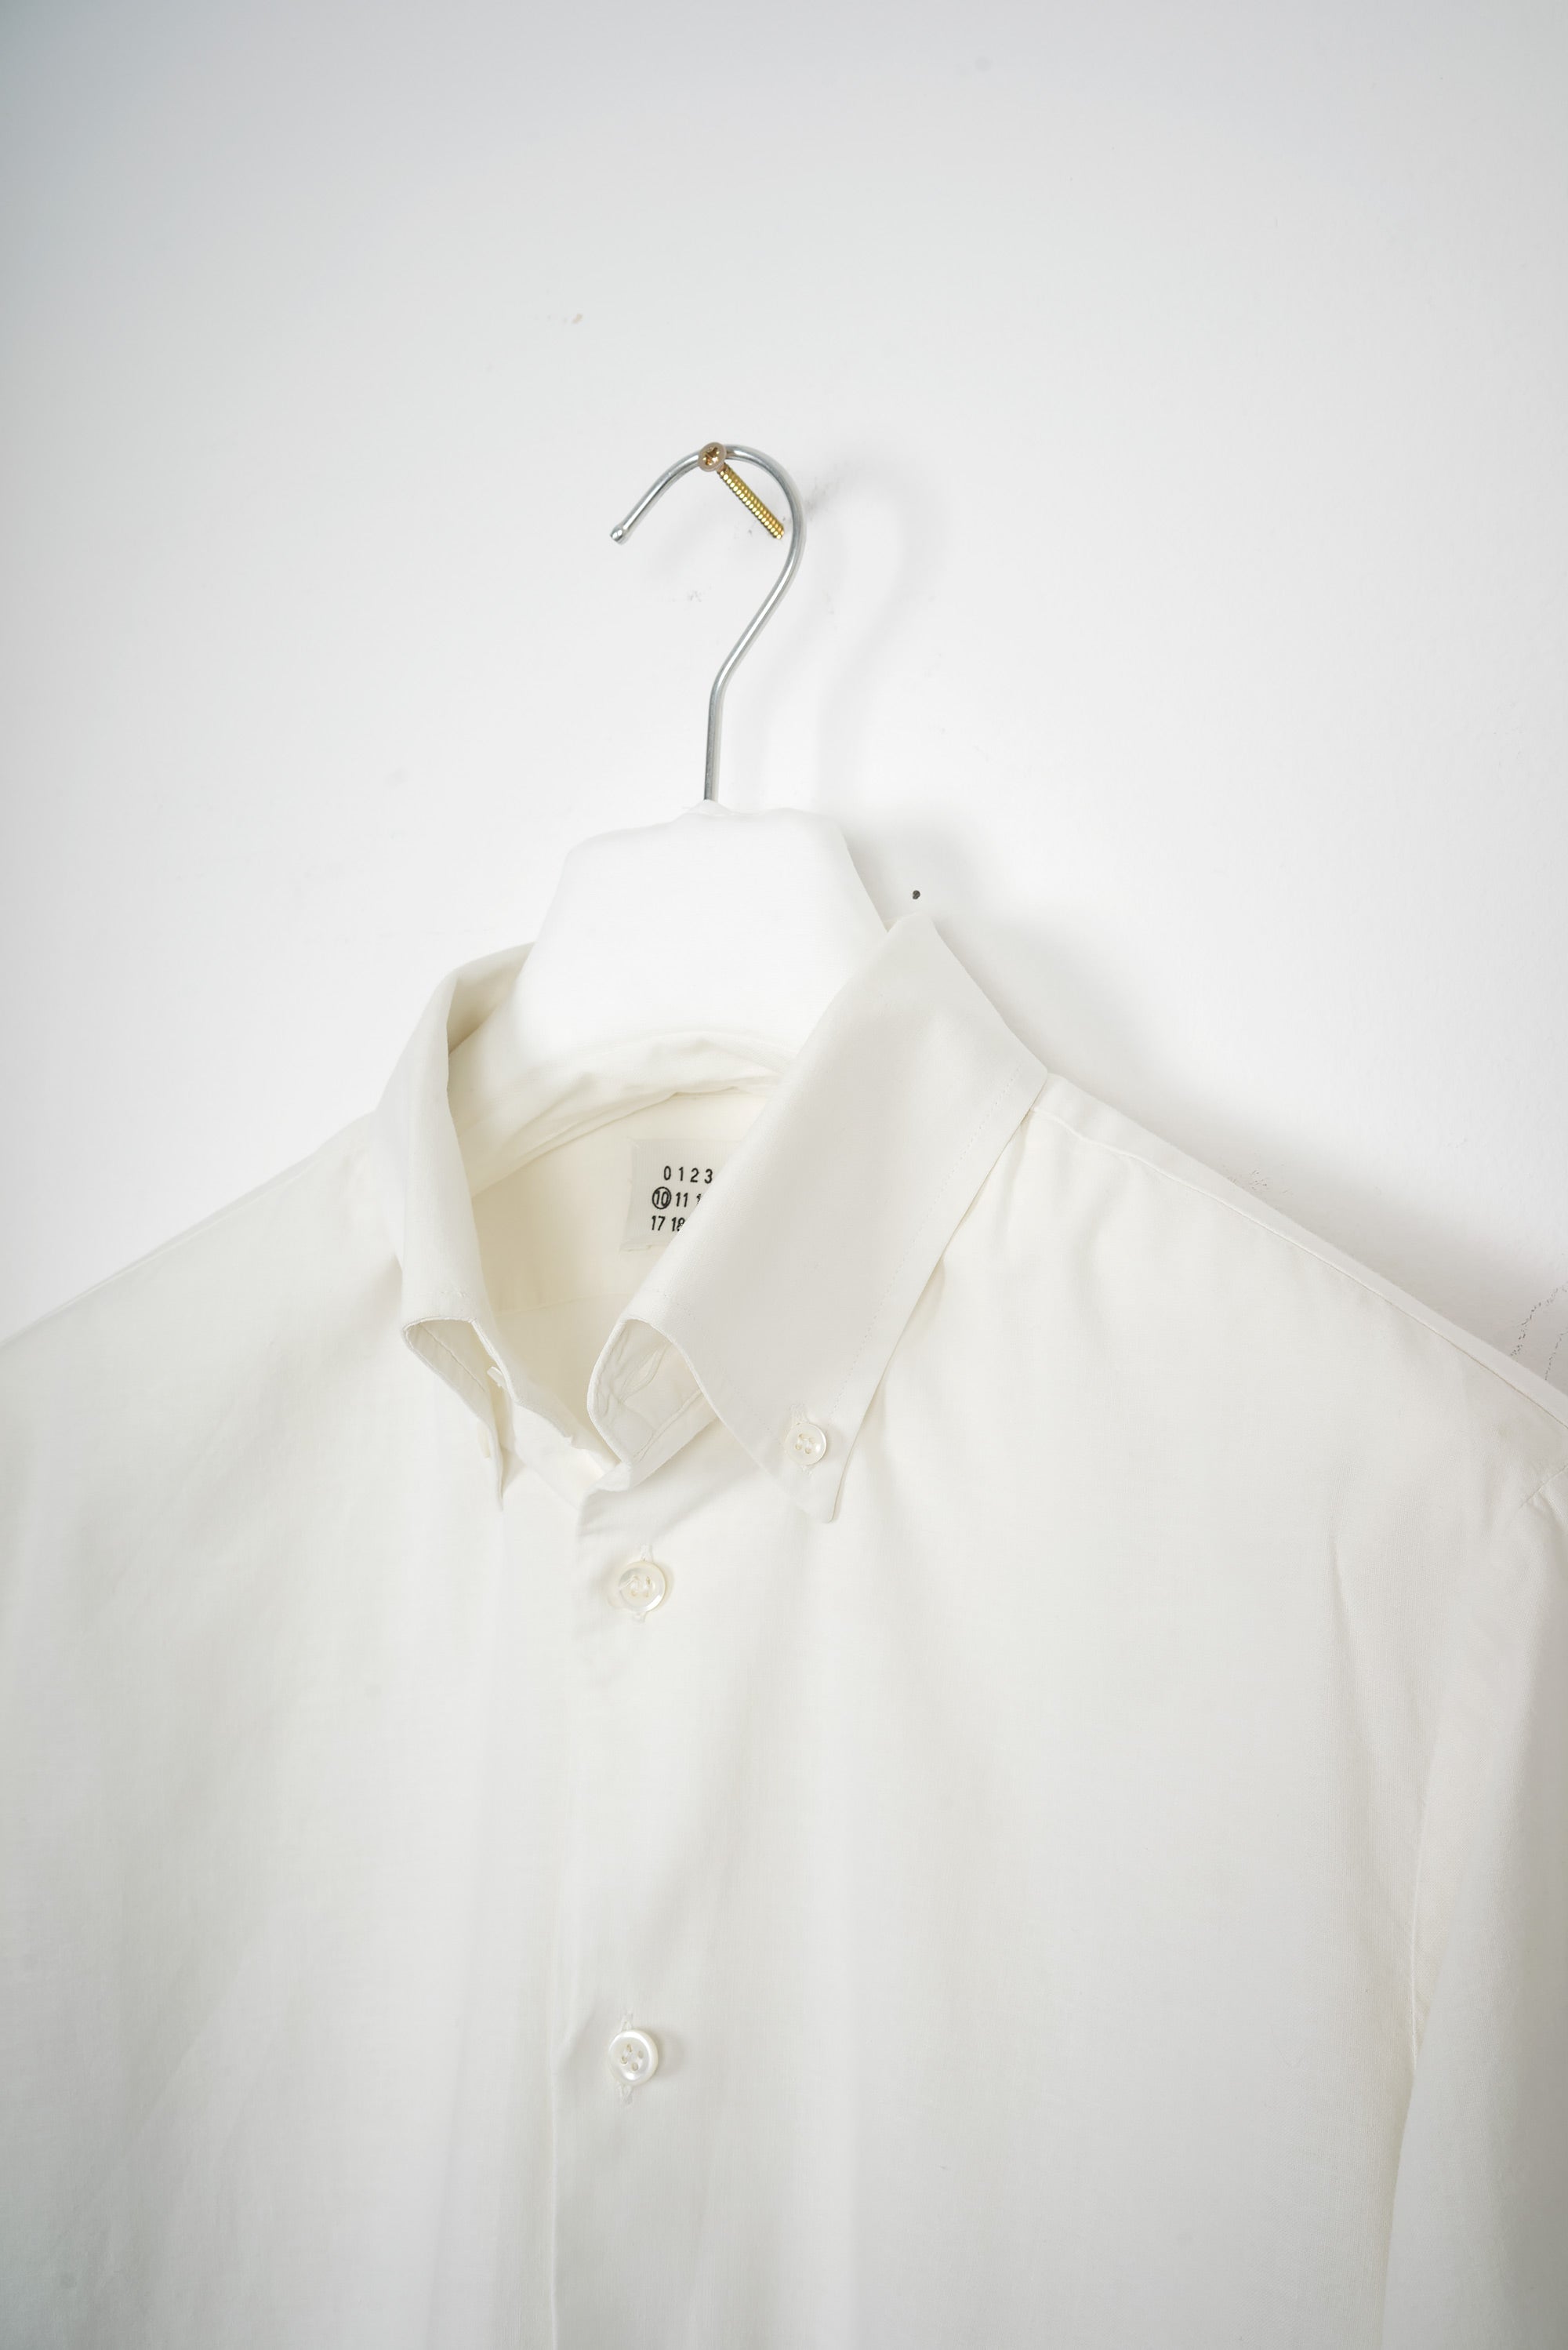 2001 S/S BUTTON DOWN SHIRT IN OFF WHITE